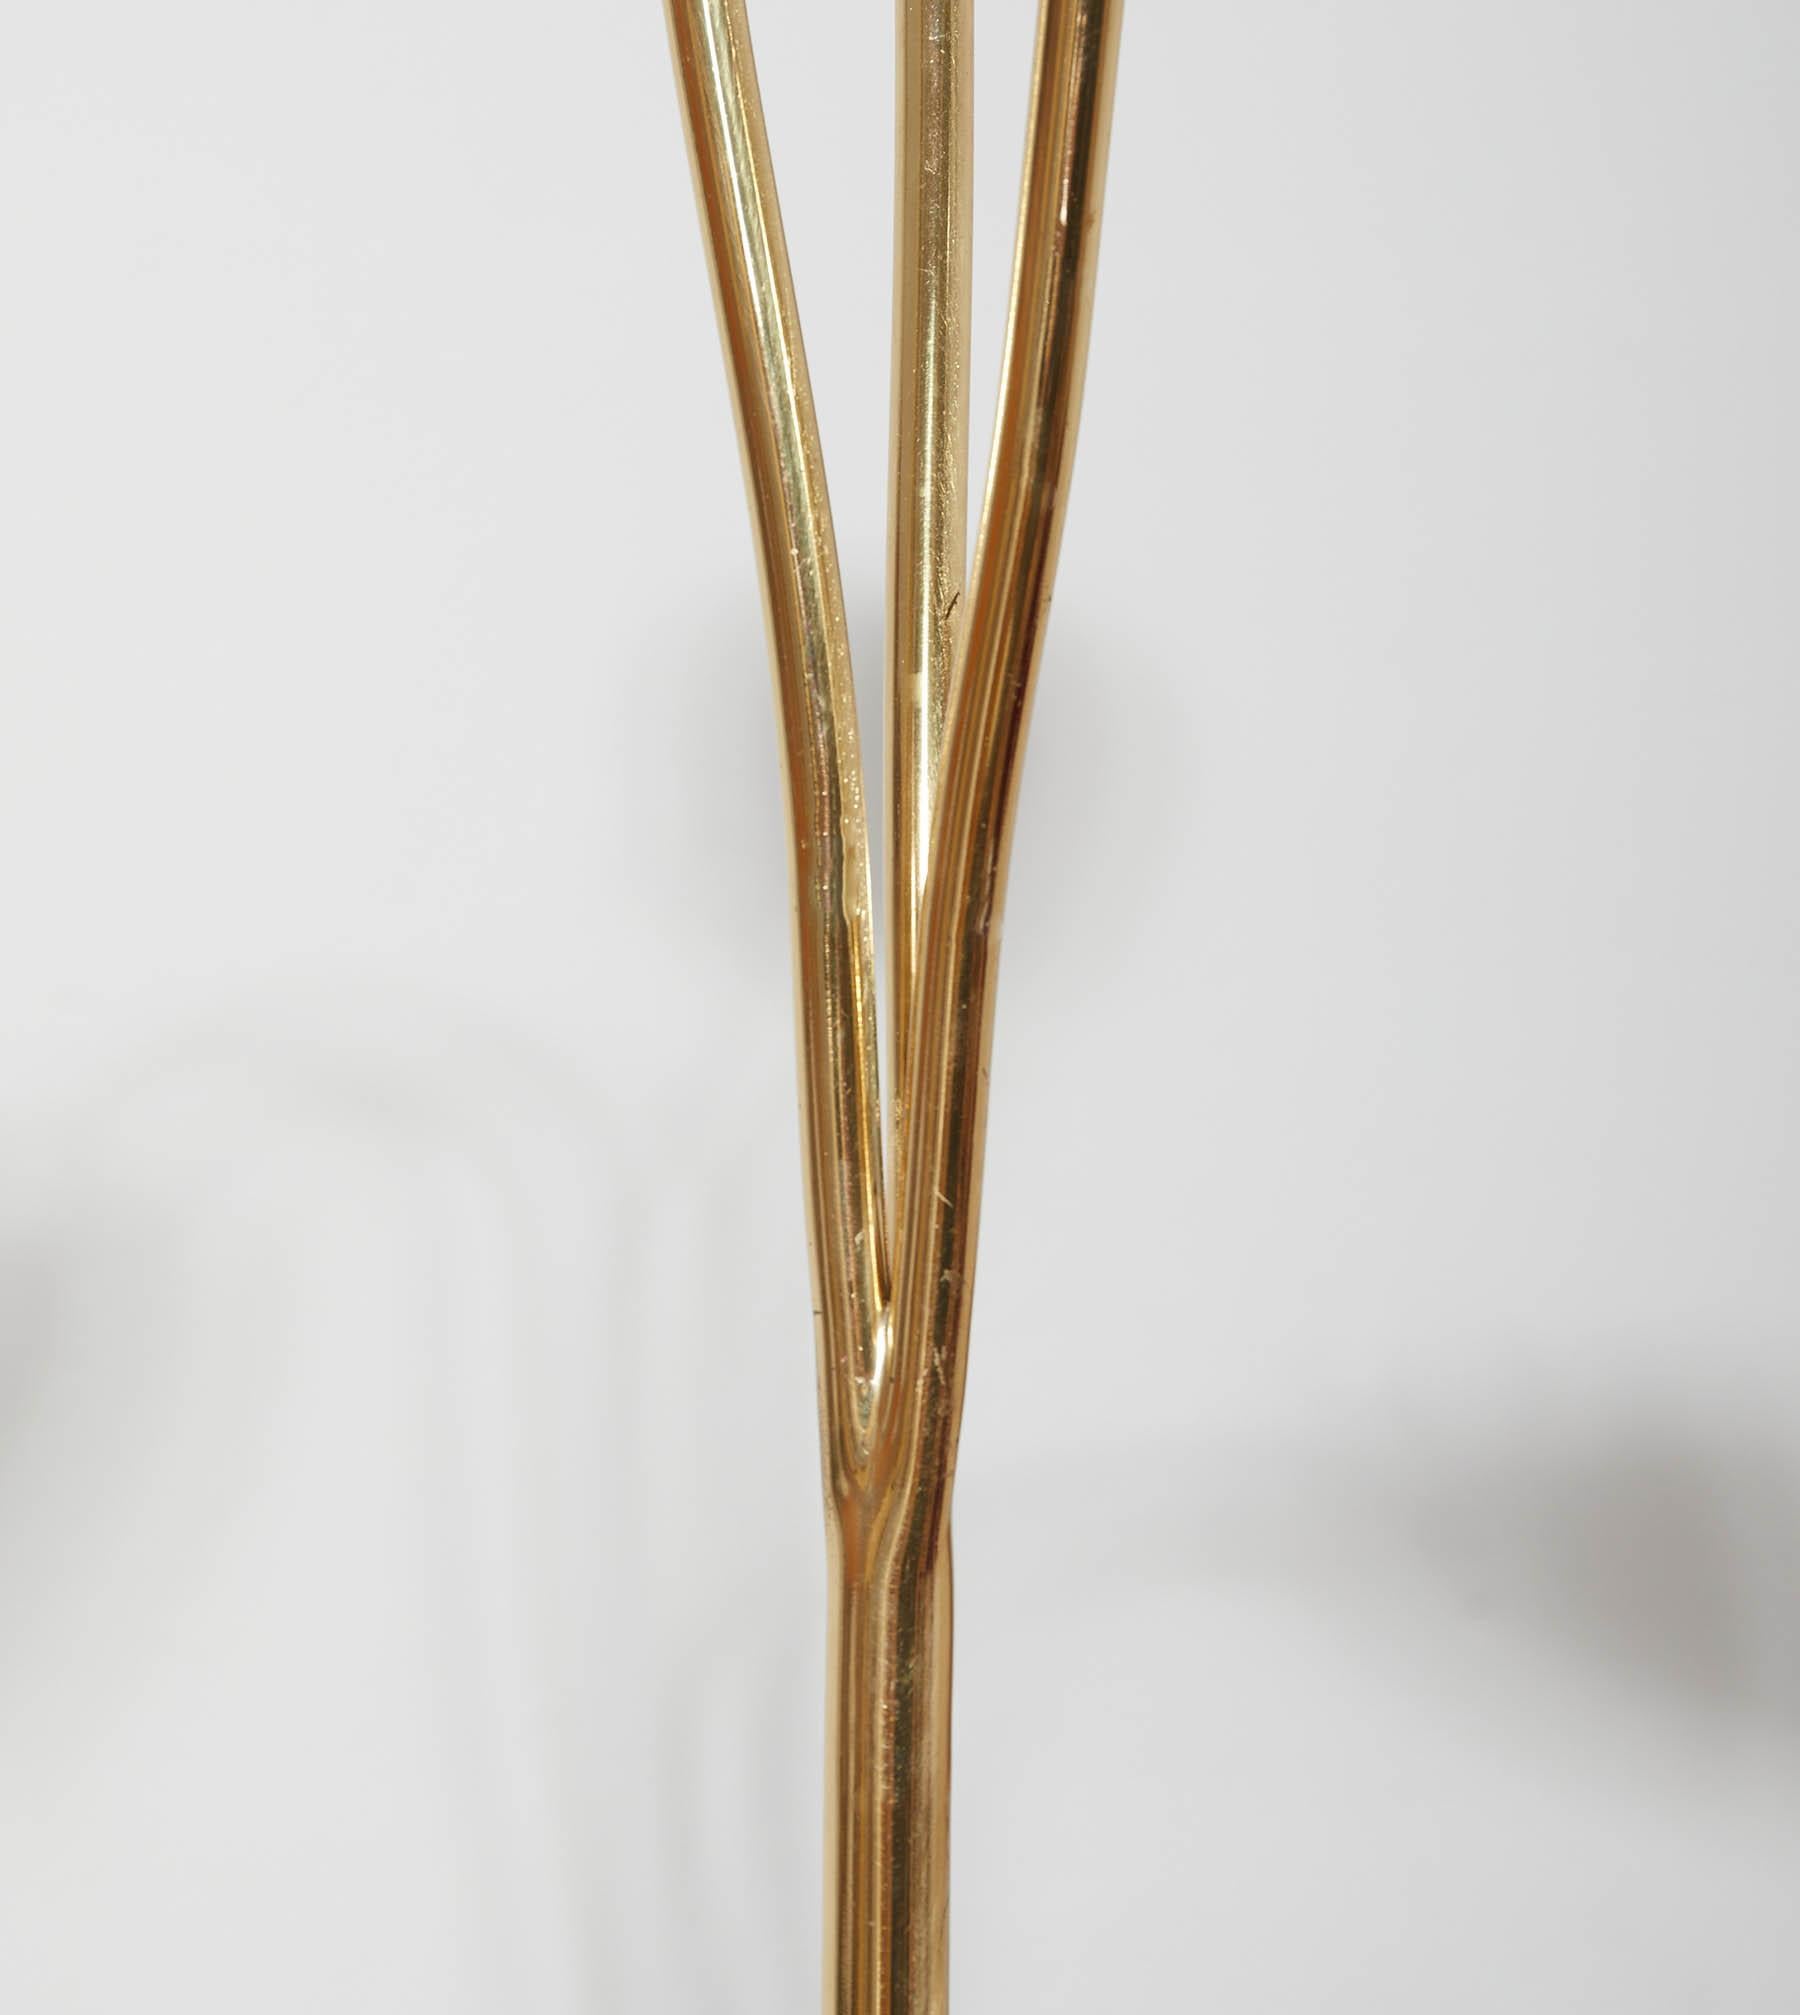 Enameled Brass Floor Lamp with Three Arms by O-Luce, Italy 1950's For Sale